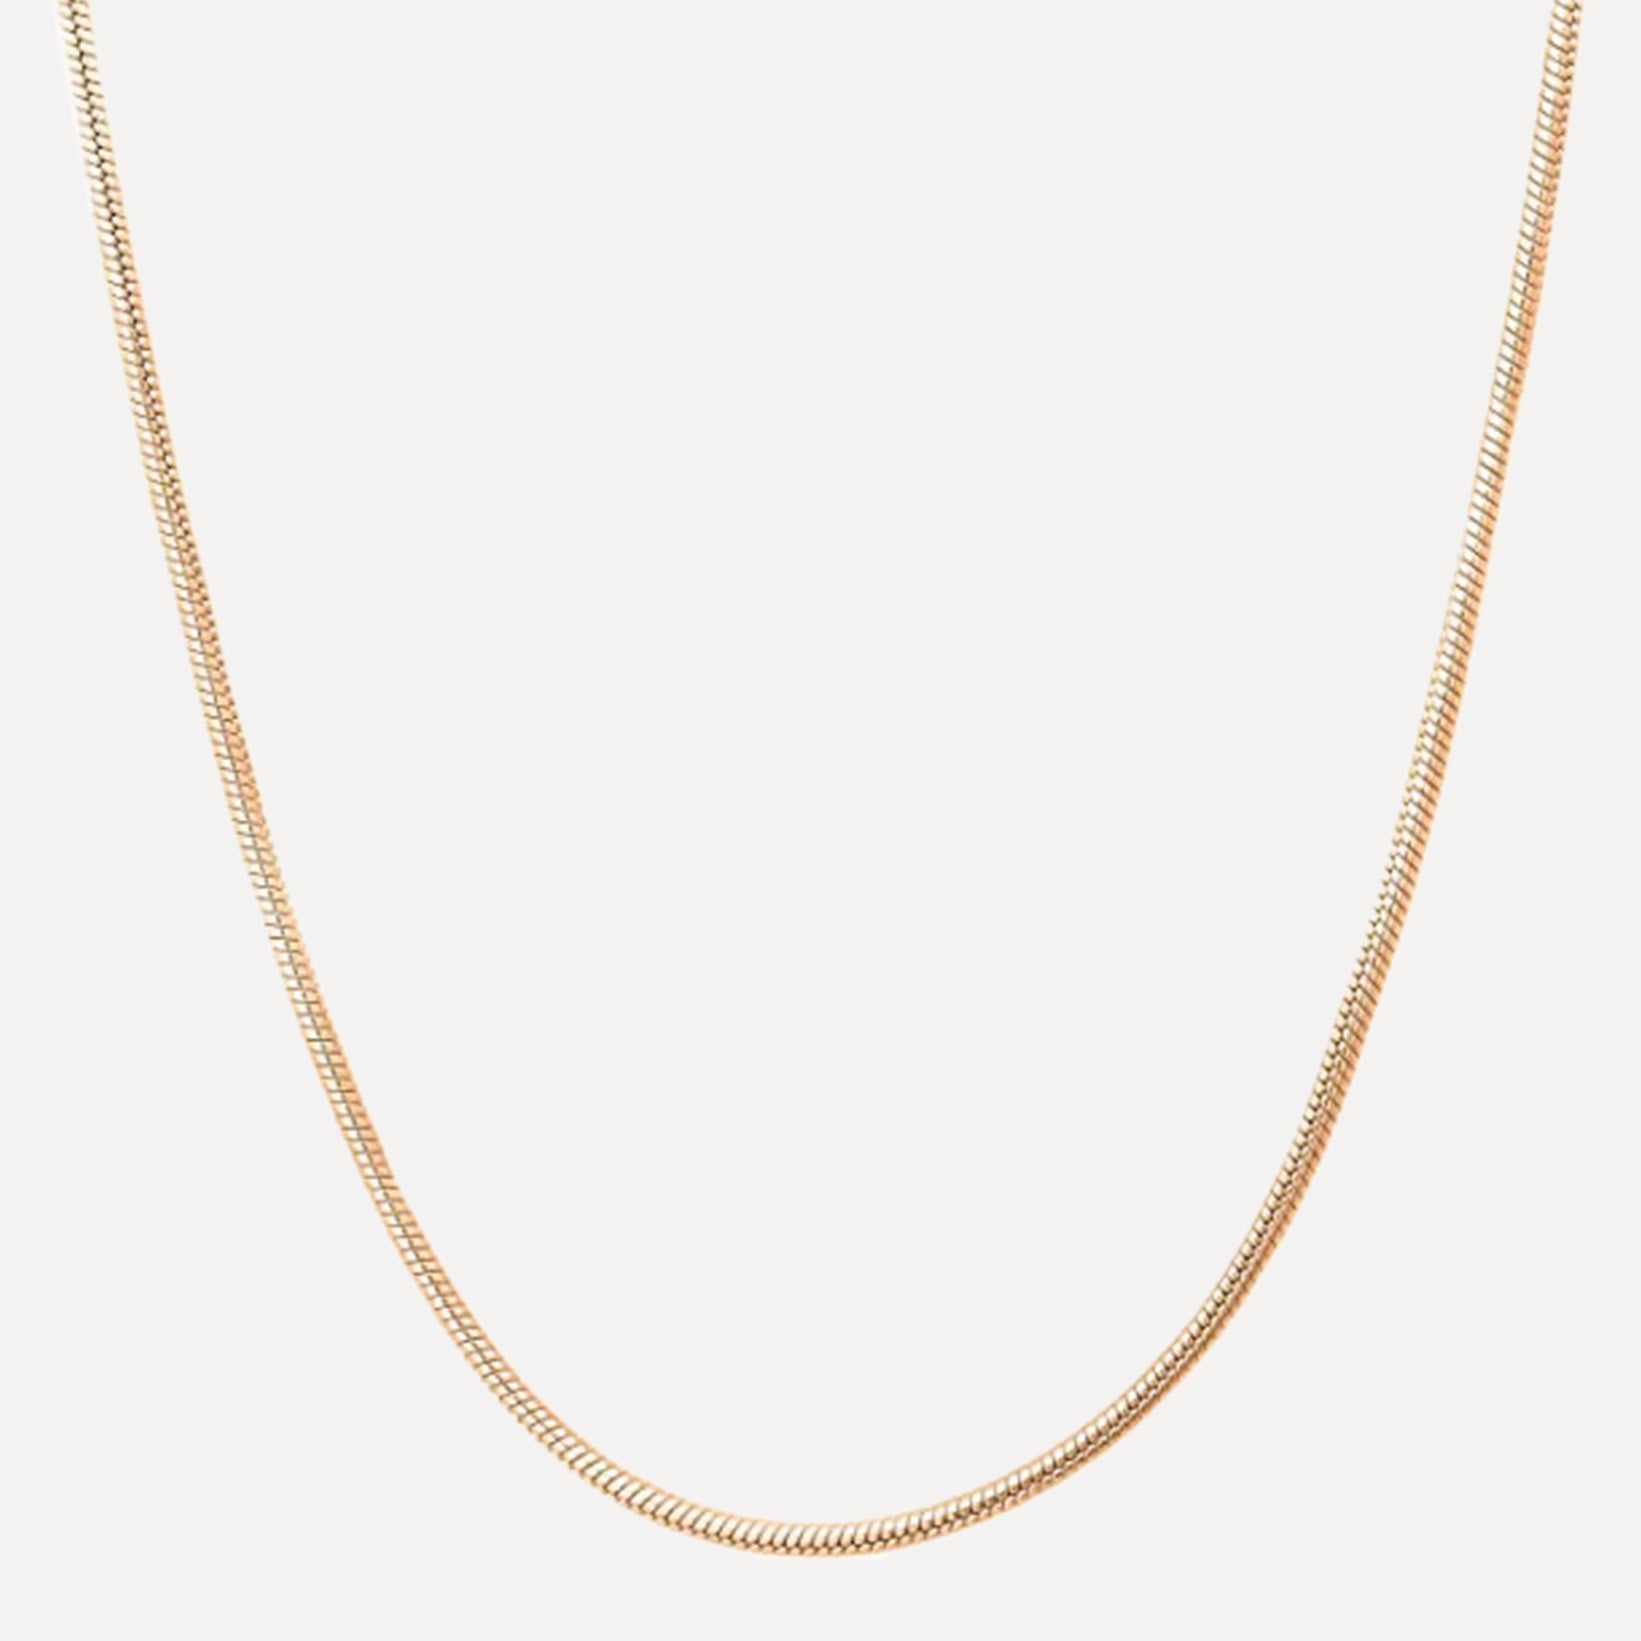 Snake Chain Necklace - Wrenlee